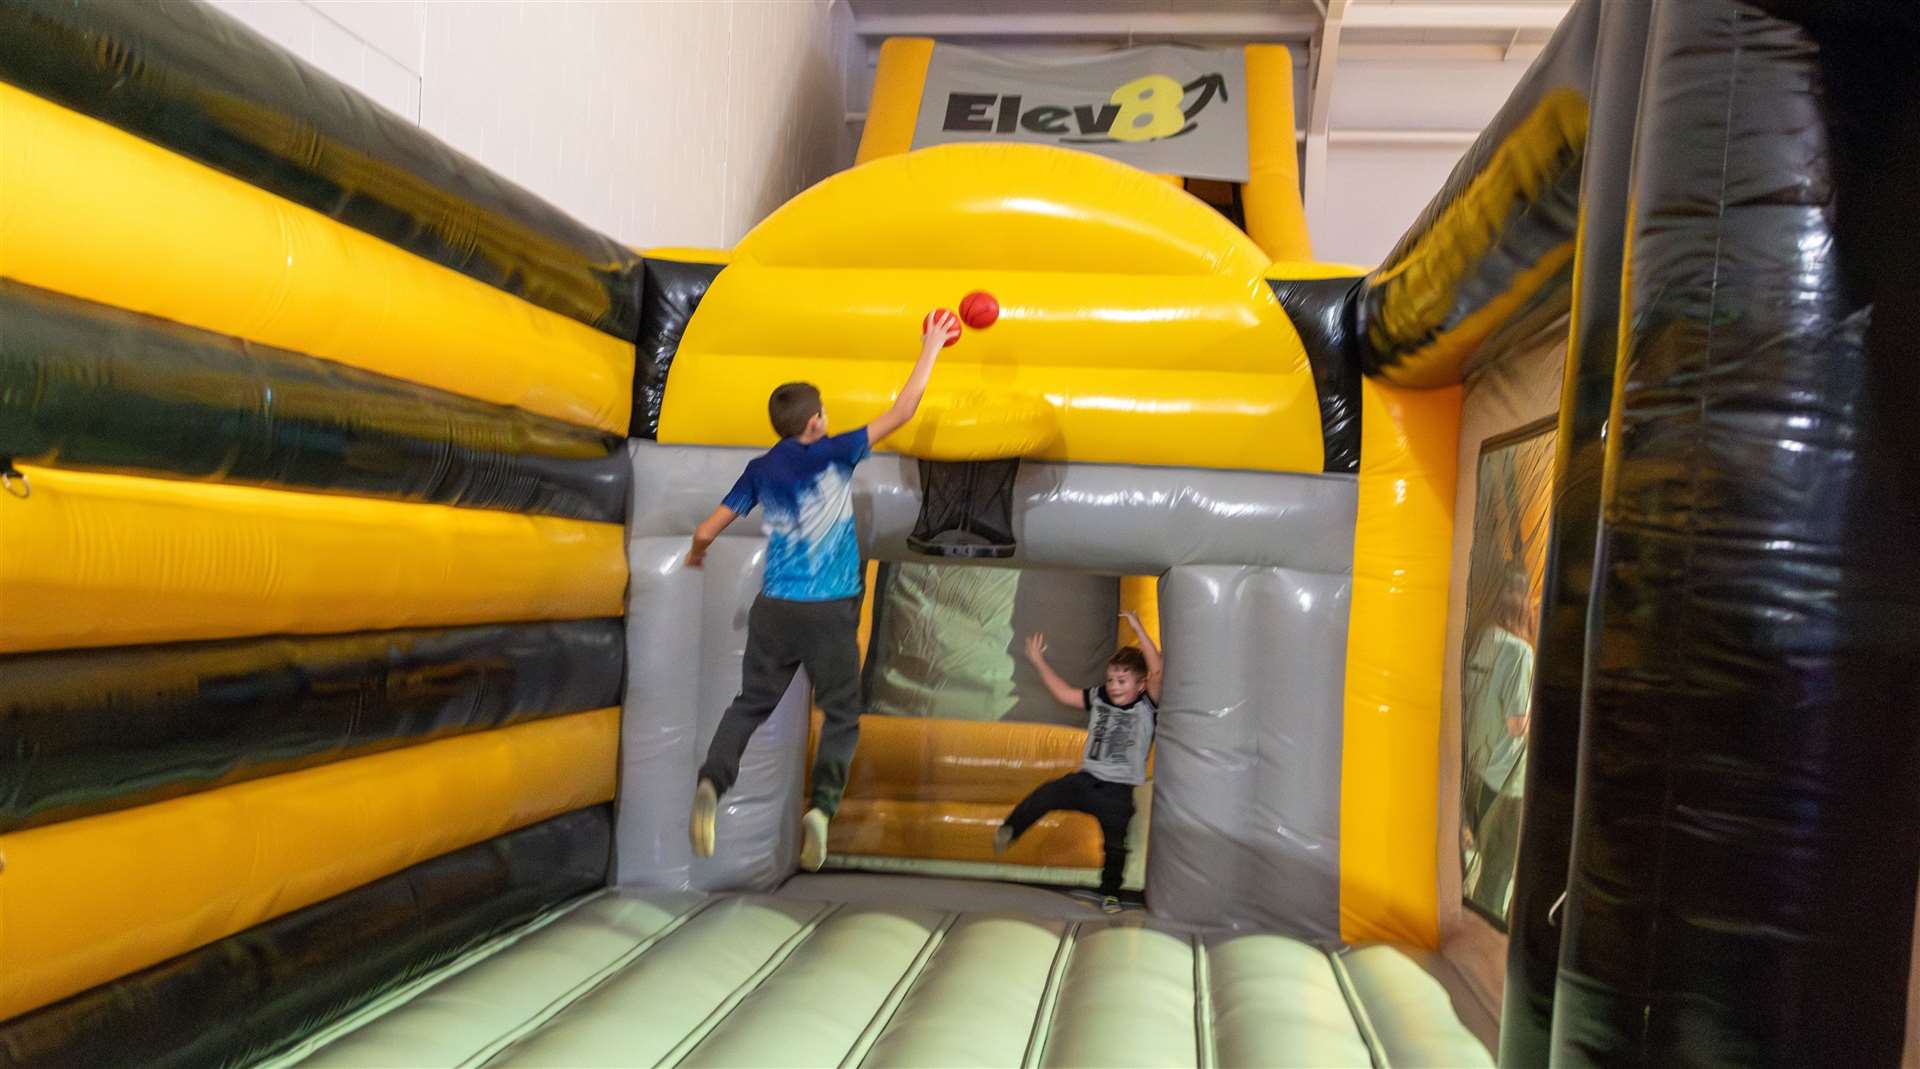 Elev8 in Broadstairs features a bounce park, a ball pit and various interactive games. Picture: Elev8